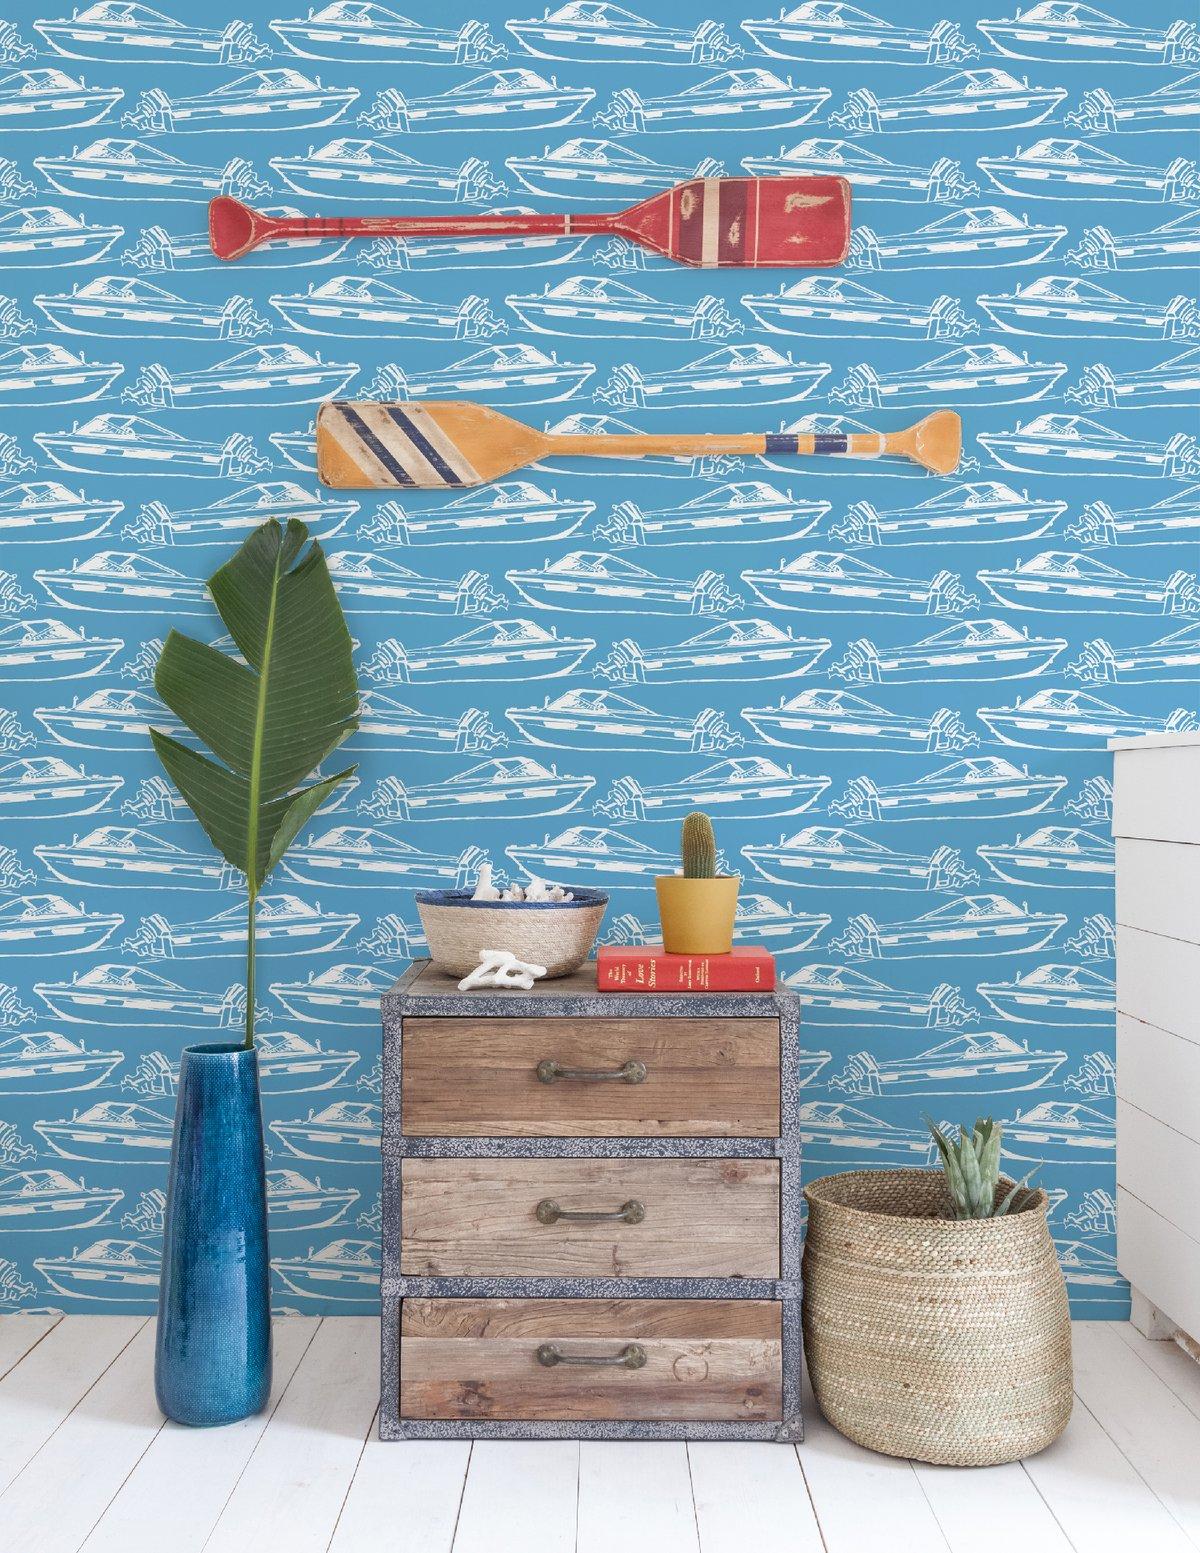 American Boating Designer Wallpaper in Pool 'Sky Blue and White' For Sale